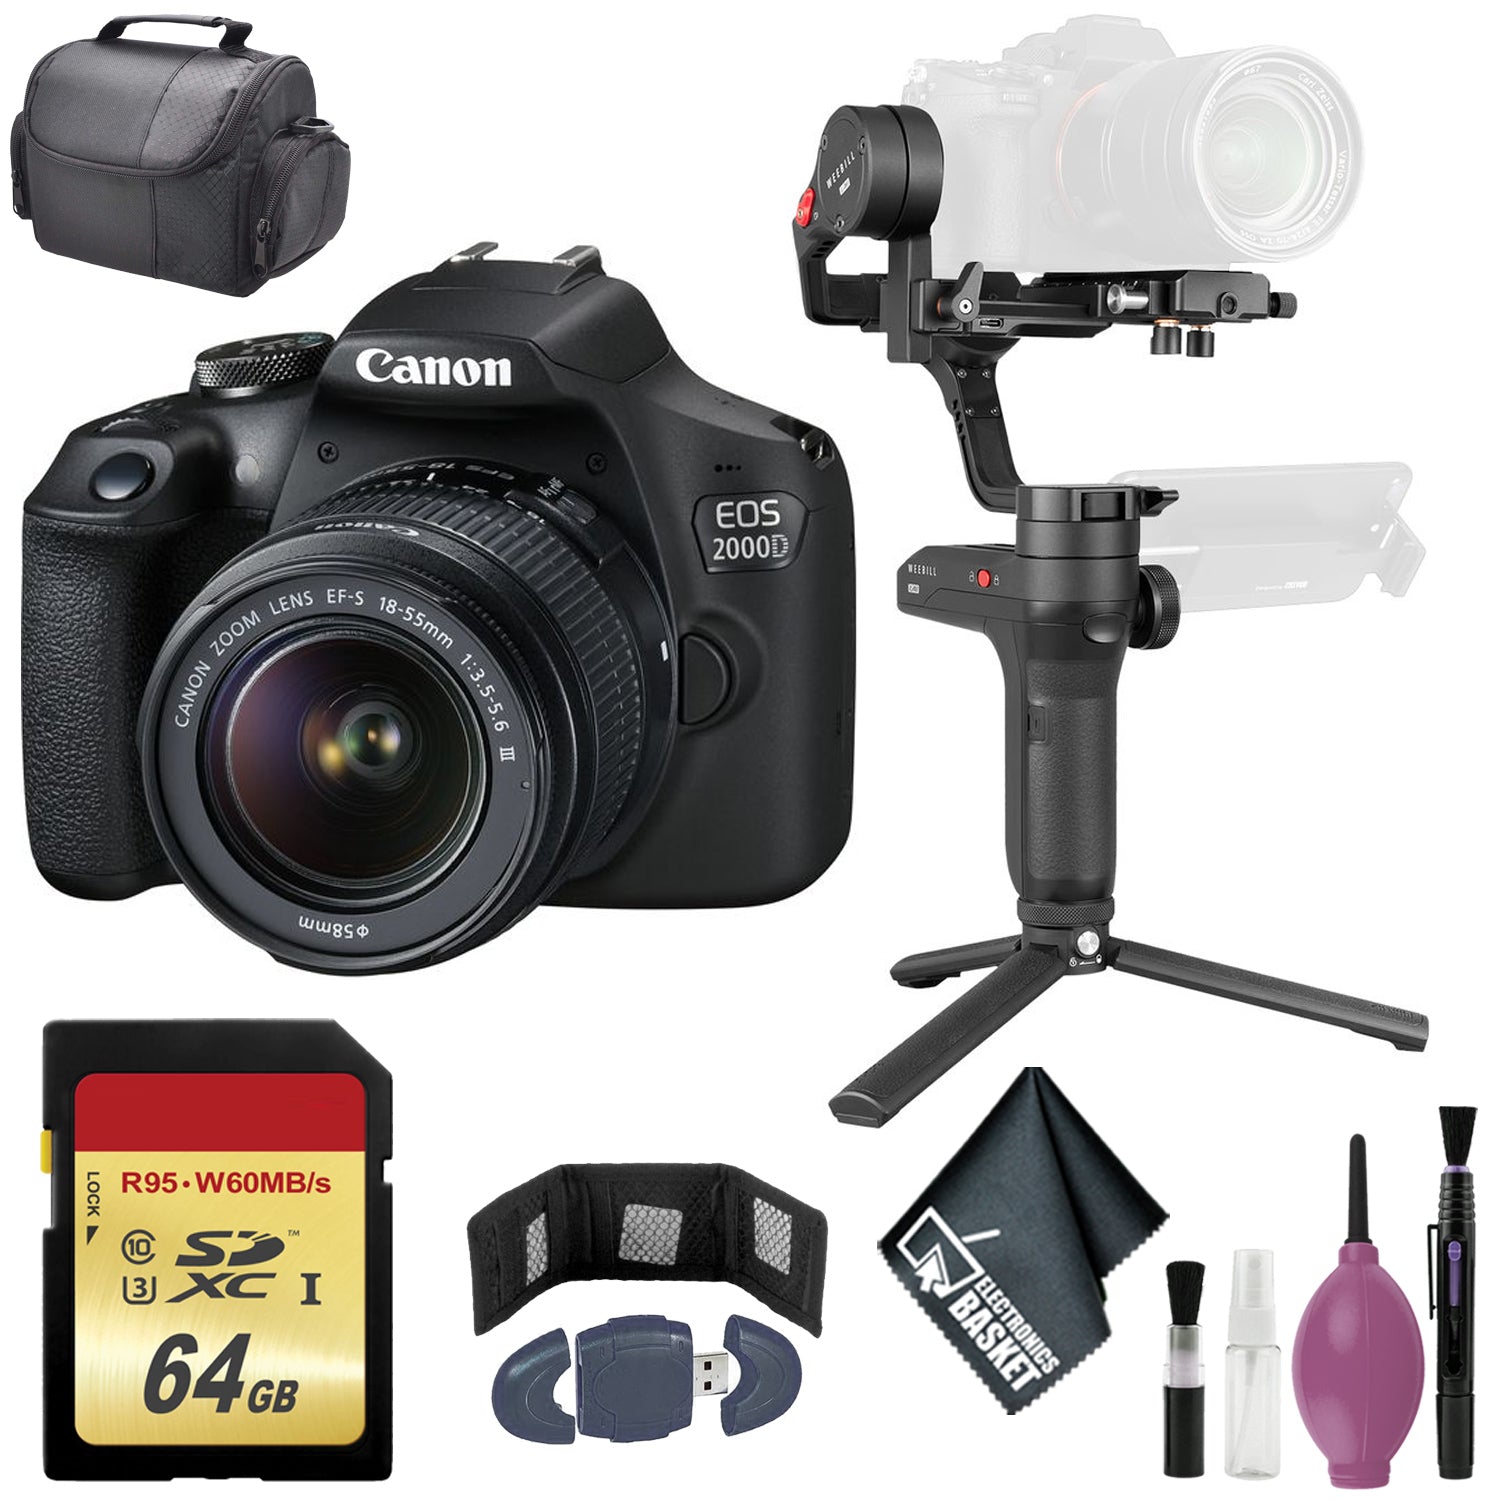  Canon EOS 2000D DSLR Camera and EF-S 18-55 mm f/3.5-5.6 is II  Lens, Black : Electronics